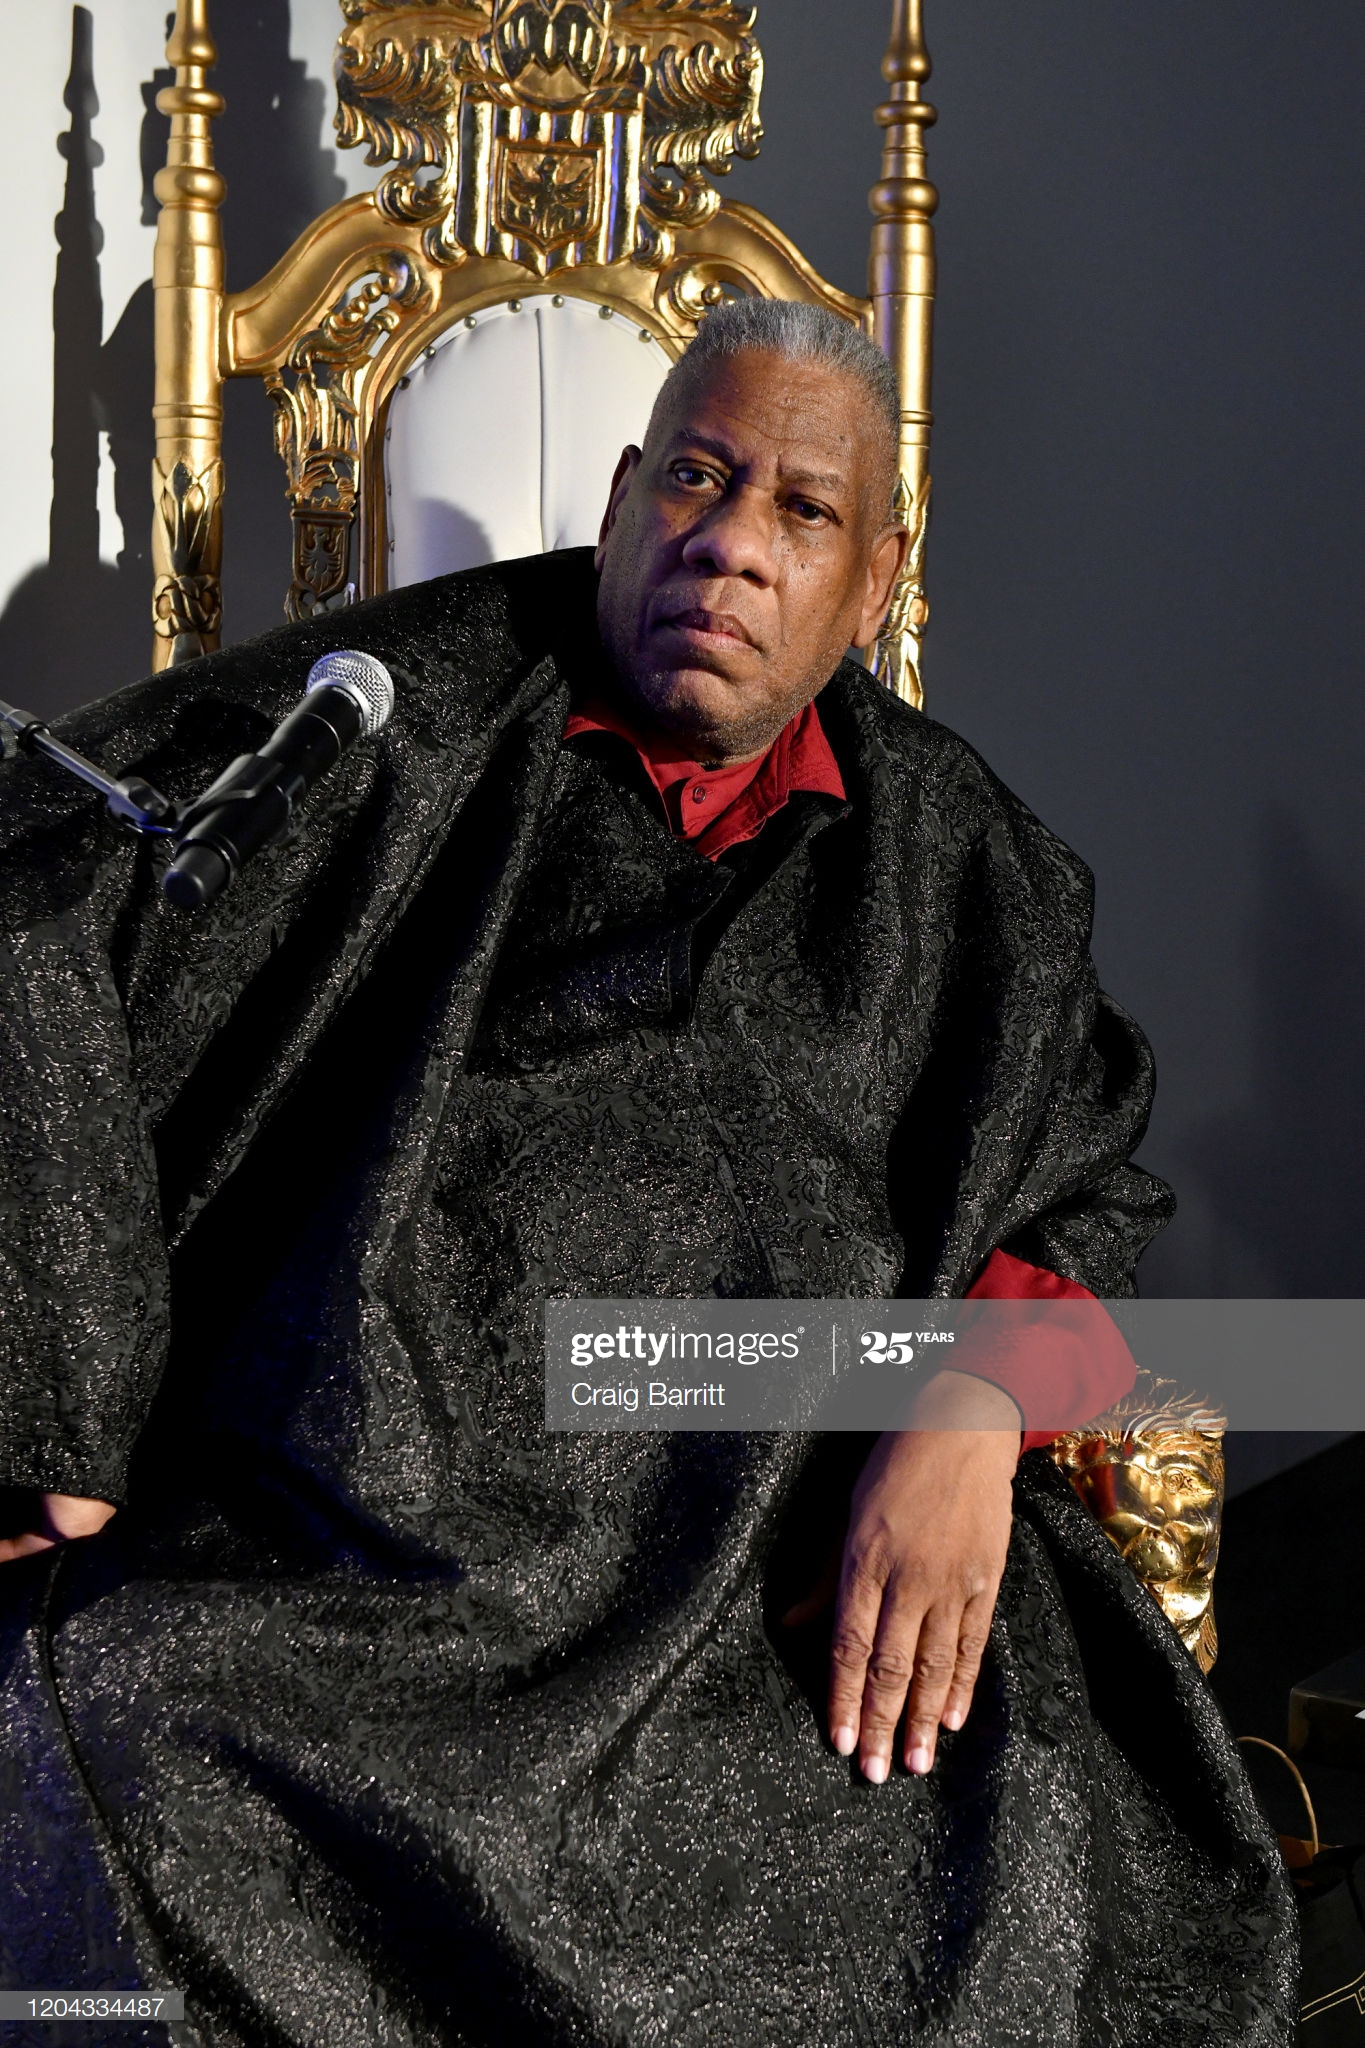 André Leon Talley Spills The Tea On Anna Wintour, Tom Ford And More In His Latest Memoir 'The Chiffon Trenches'